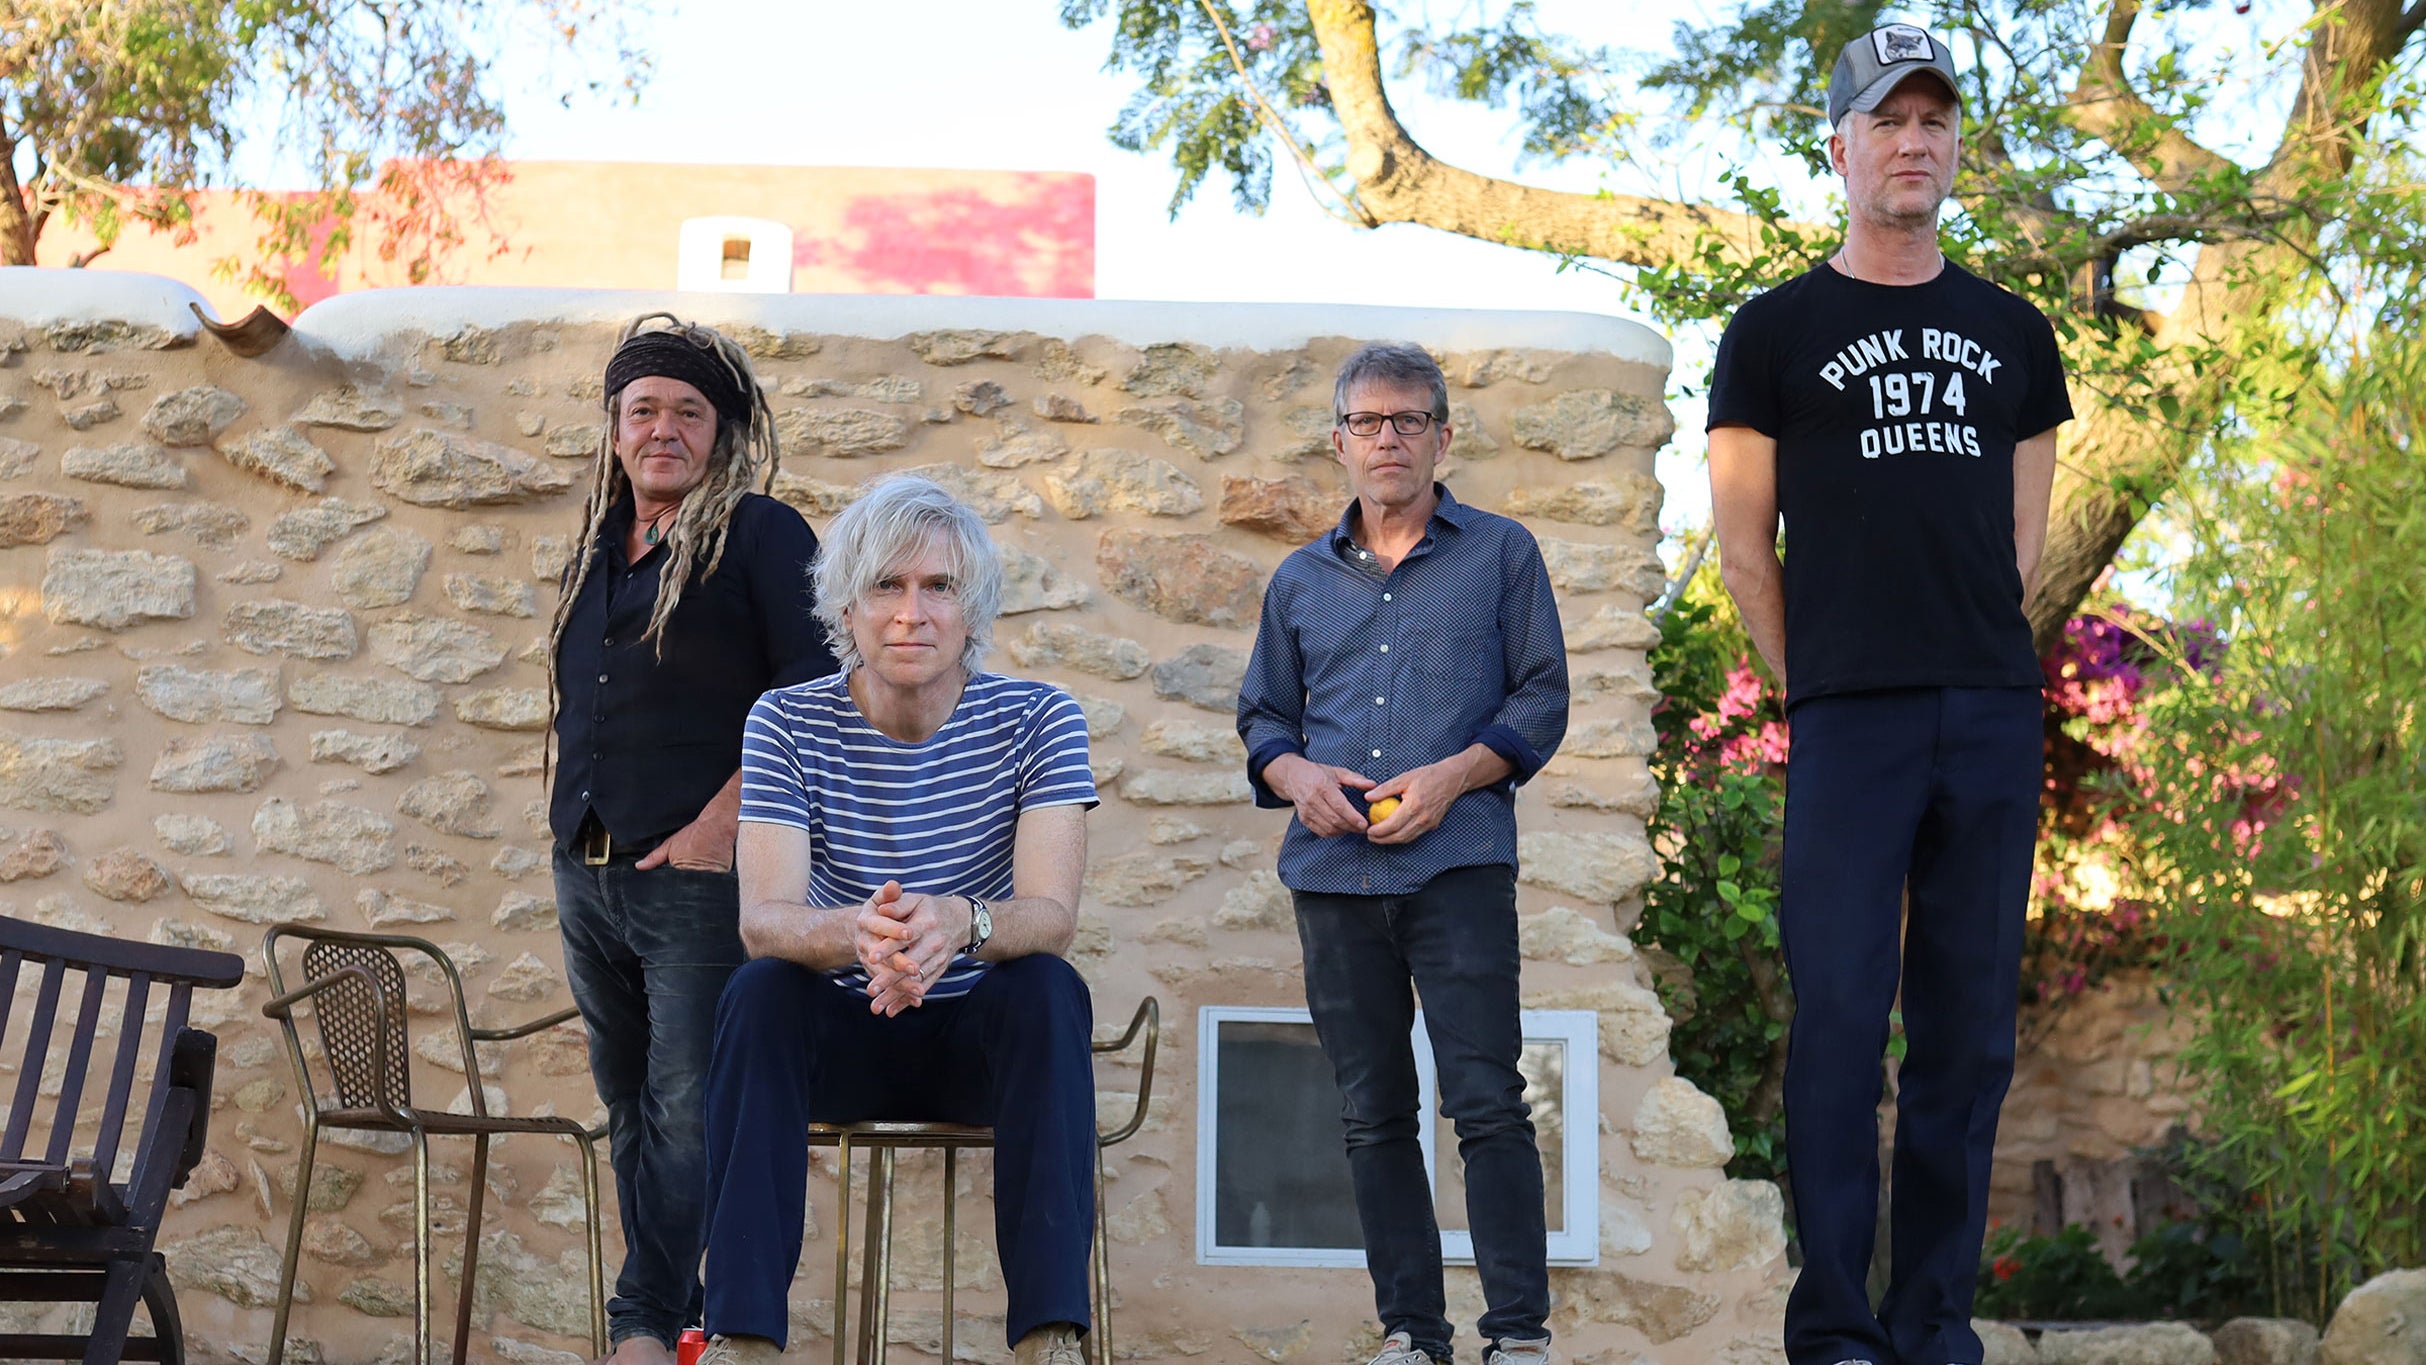 Nada Surf: Moon Mirror Tour in Washington promo photo for Artist Presale and Spotify presale offer code